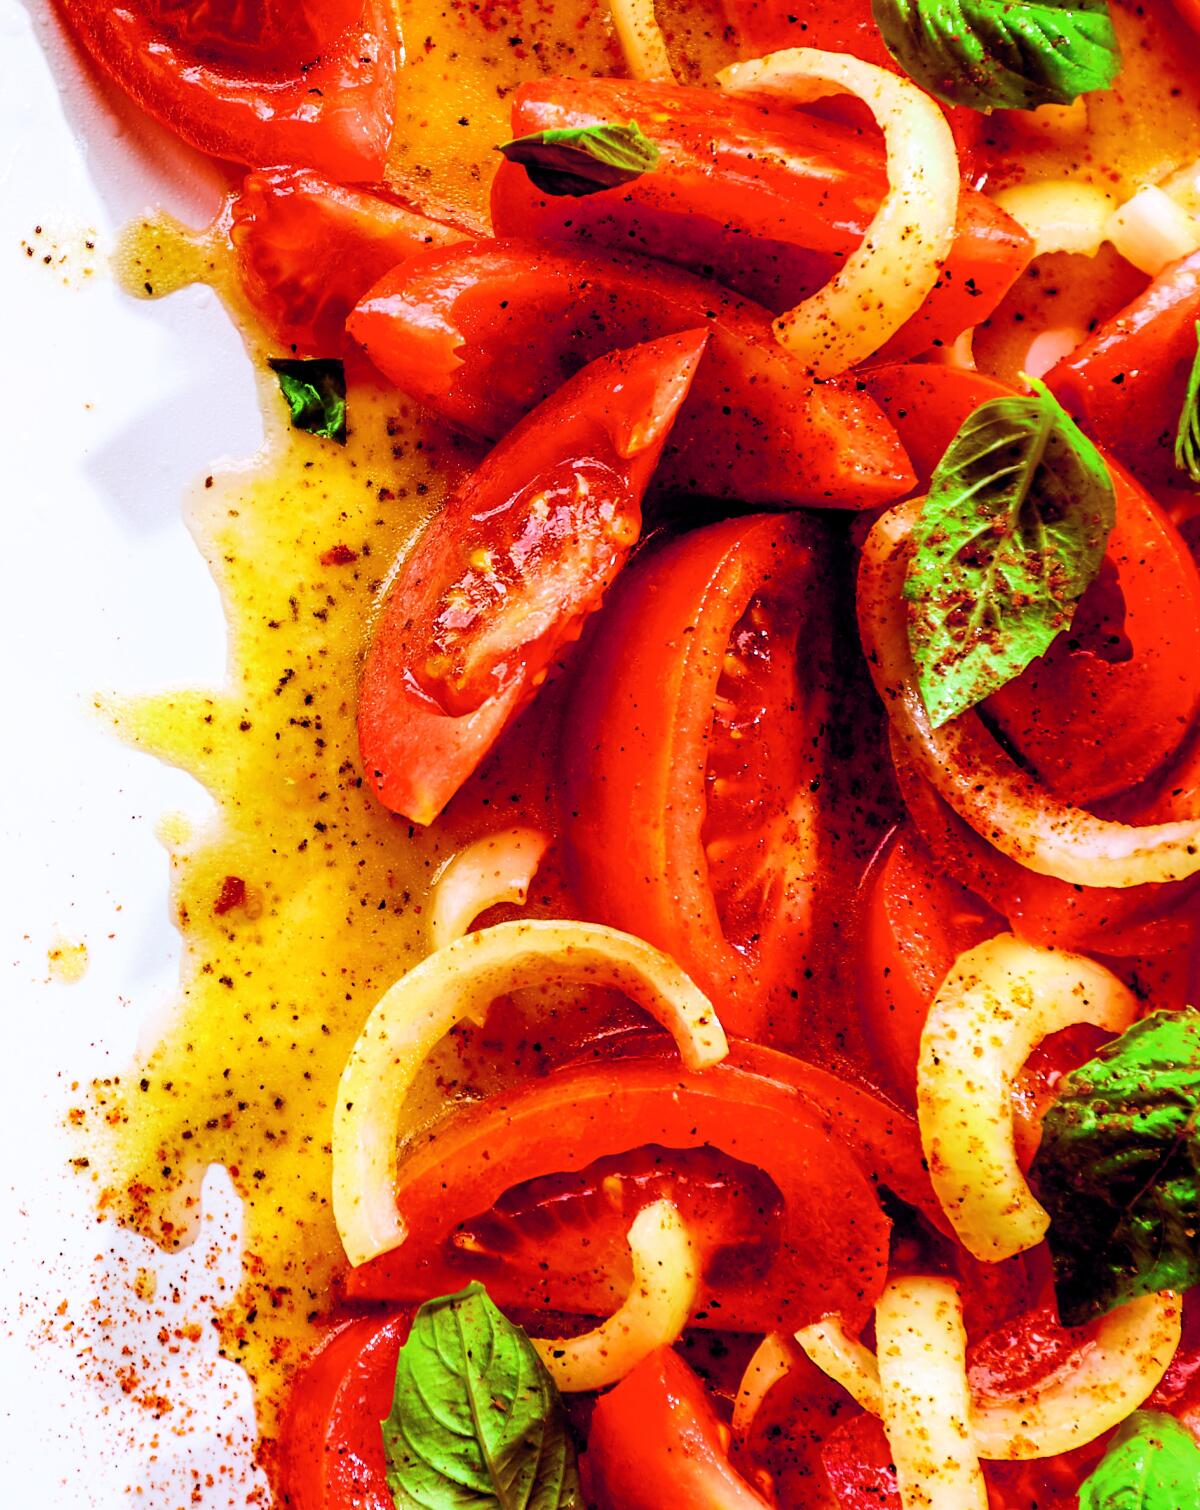 Wedges of tomatoes and hefty slices of onion with basil leaves in a vinaigrette.